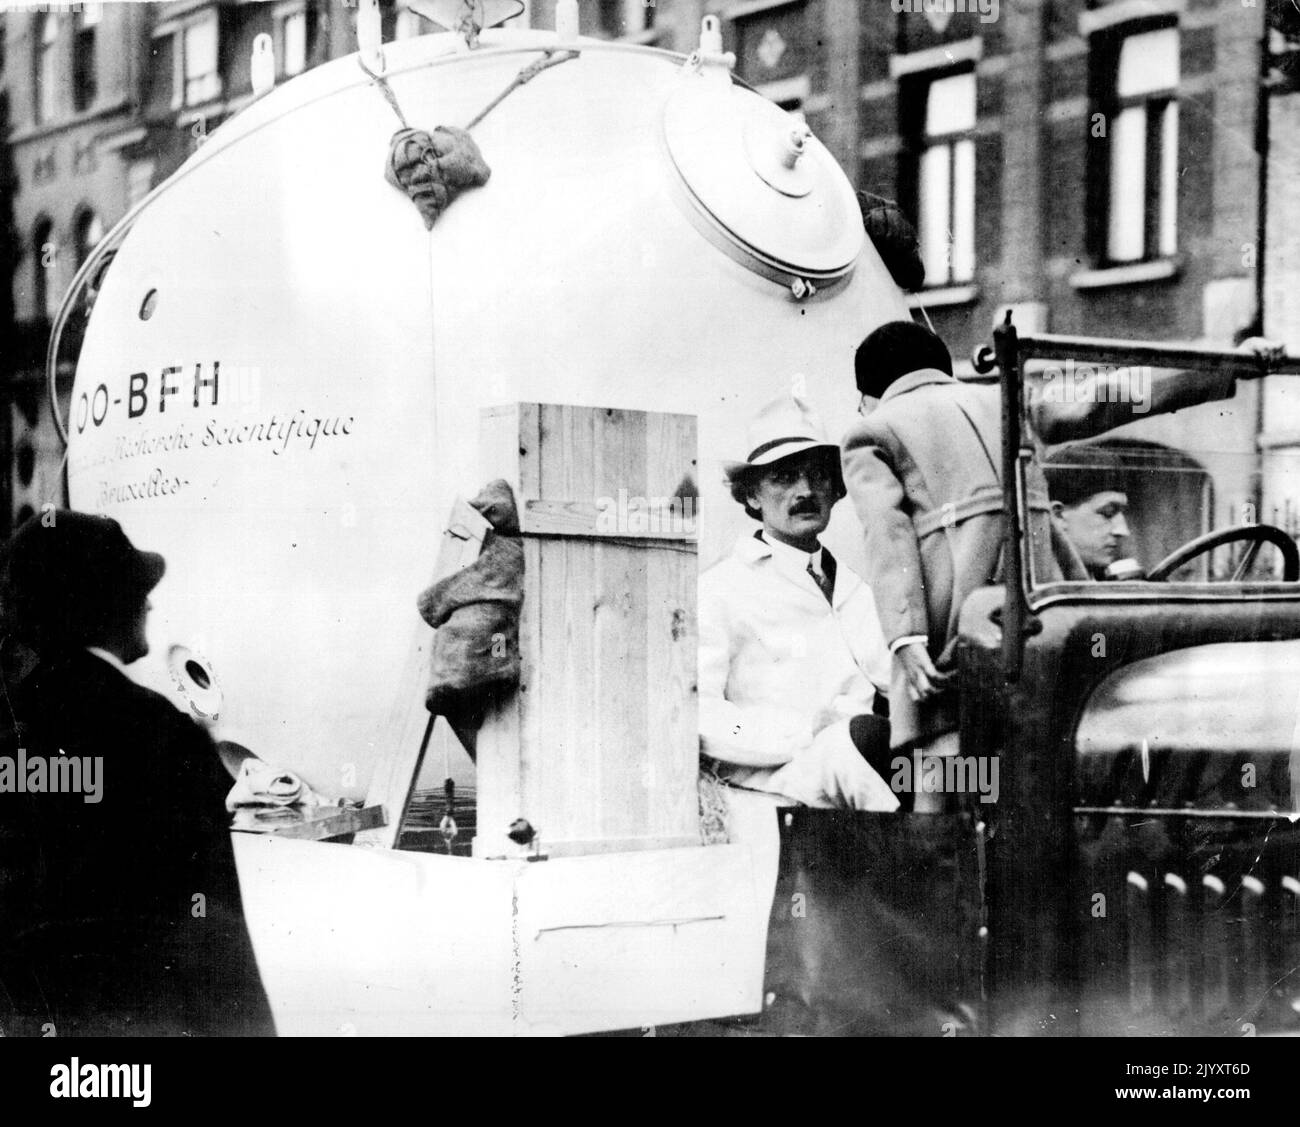 Prof. Piccard Leaves For Zurich Flight Into Stratosphere -- Professor Piccard about to leave Brussels on lorry with his new aluminium sphere in which he will make the flight. Professor Piccard, accompanied by his helper Max Cosyns and M. Kipper, left Brussels yesterday August 1 for Zurich where he will ascend into the stratosphere as soon as weather conditions permit. The Professor is not aiming to beat his previous record but to study the cosmic rays. He will take with him a short-wave transmitting wireless set. September 26, 1932. (Photo by The Associated Press of Great Britain Ltd.). Stock Photo